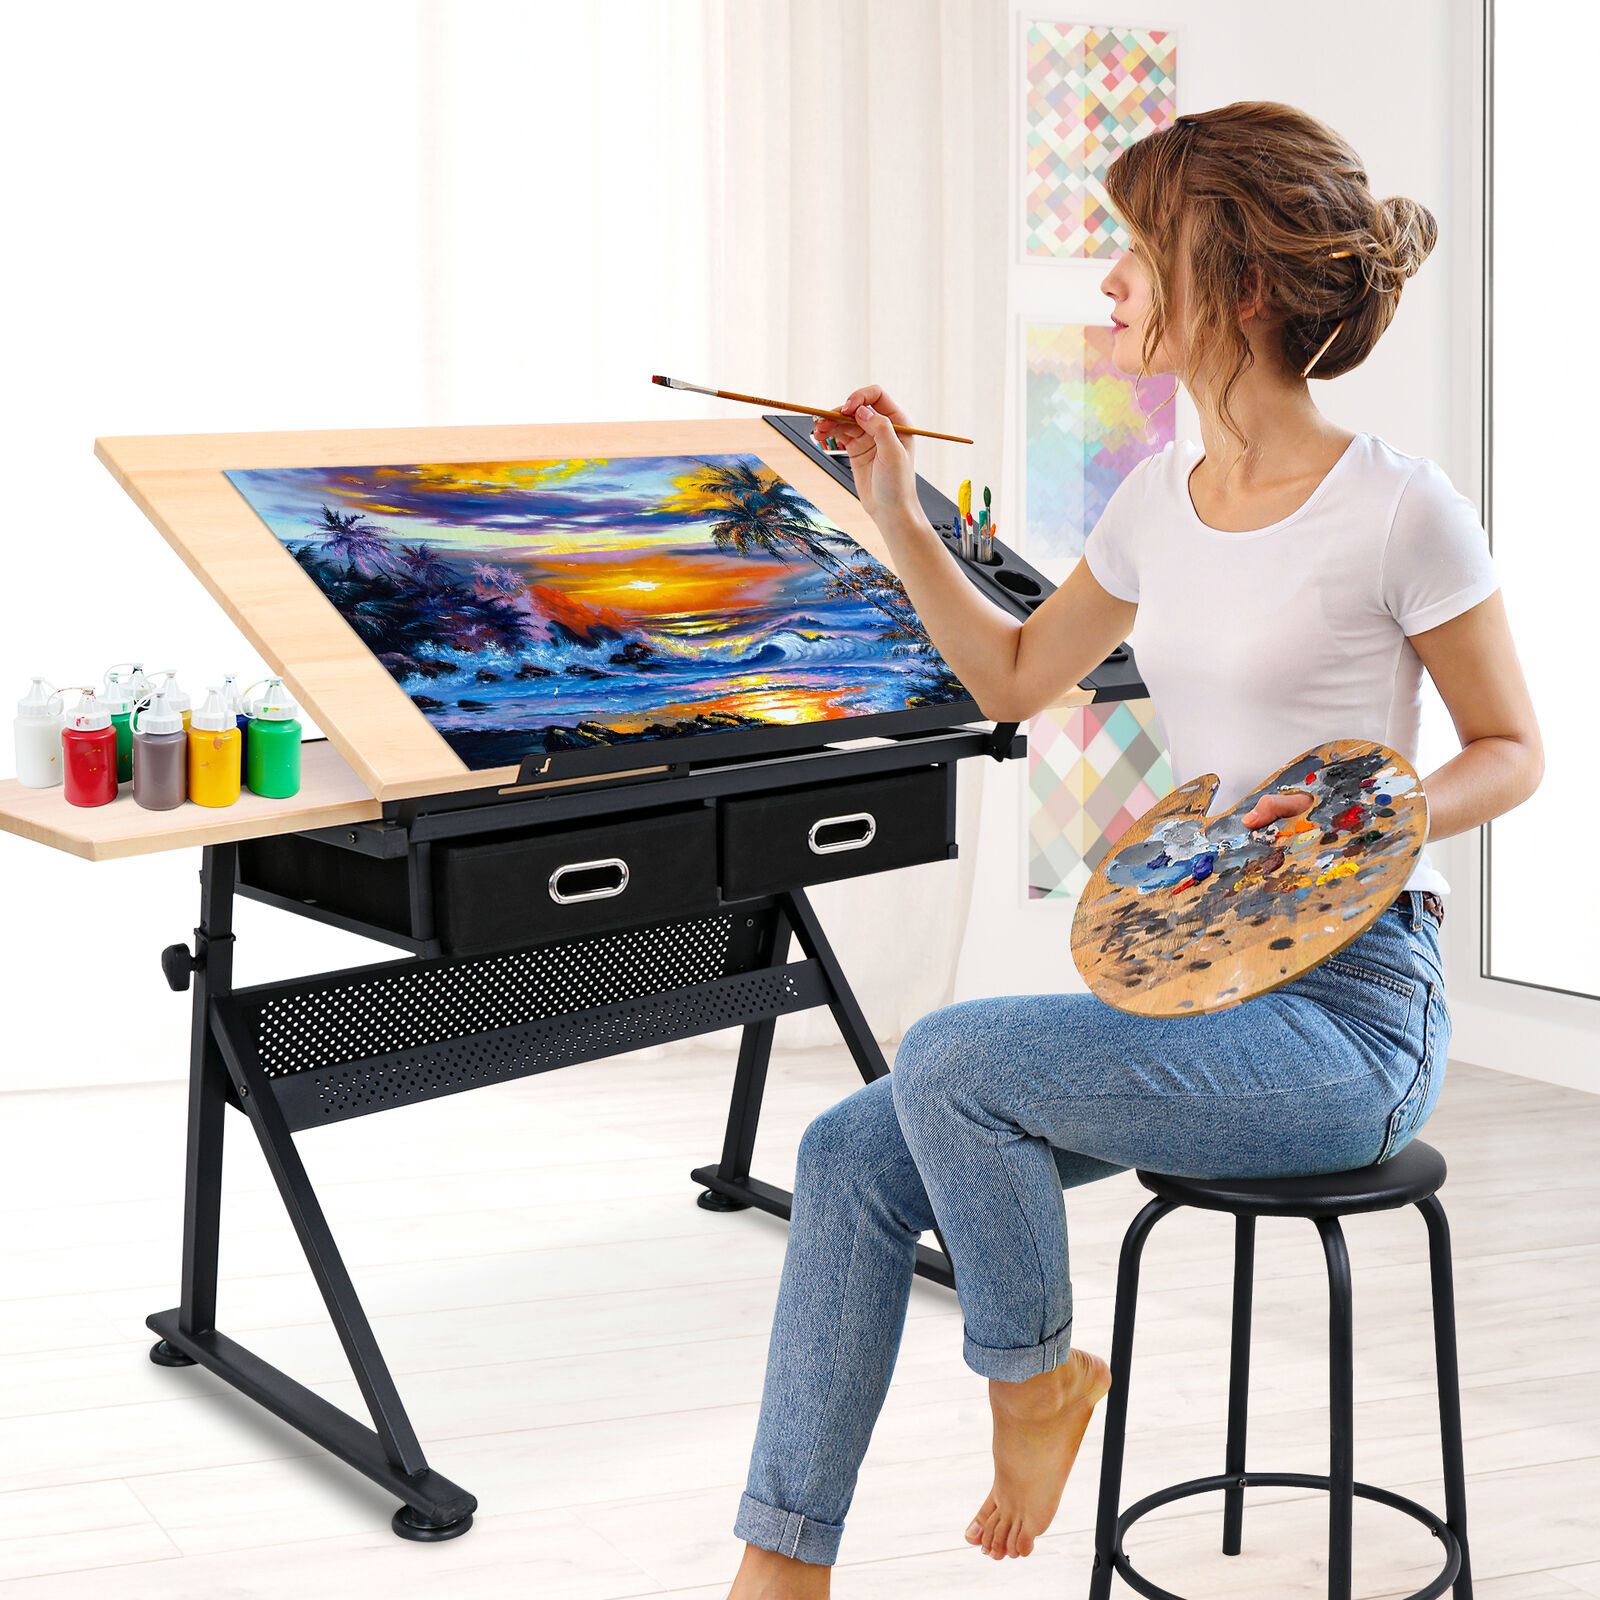 Drafting Desk Drawing Table Adjustable with Stool Arts & Crafts Creative Center